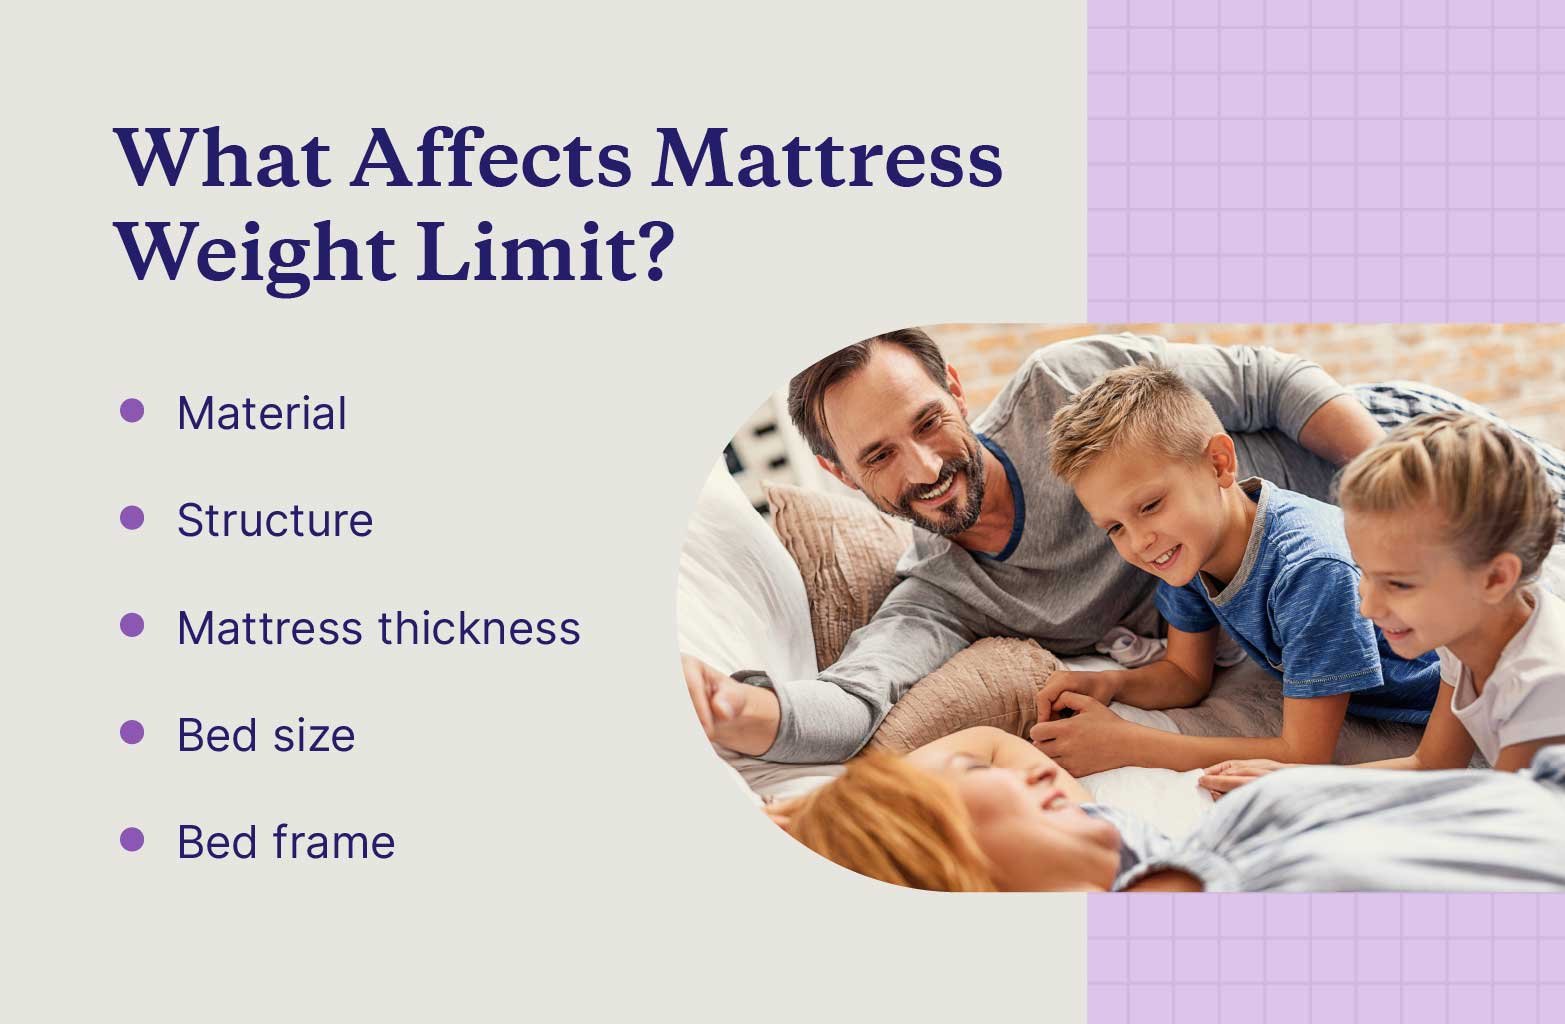 Graphic describing 5 factors that affect mattress weight limit with a picture of a family with two kids on a bed.